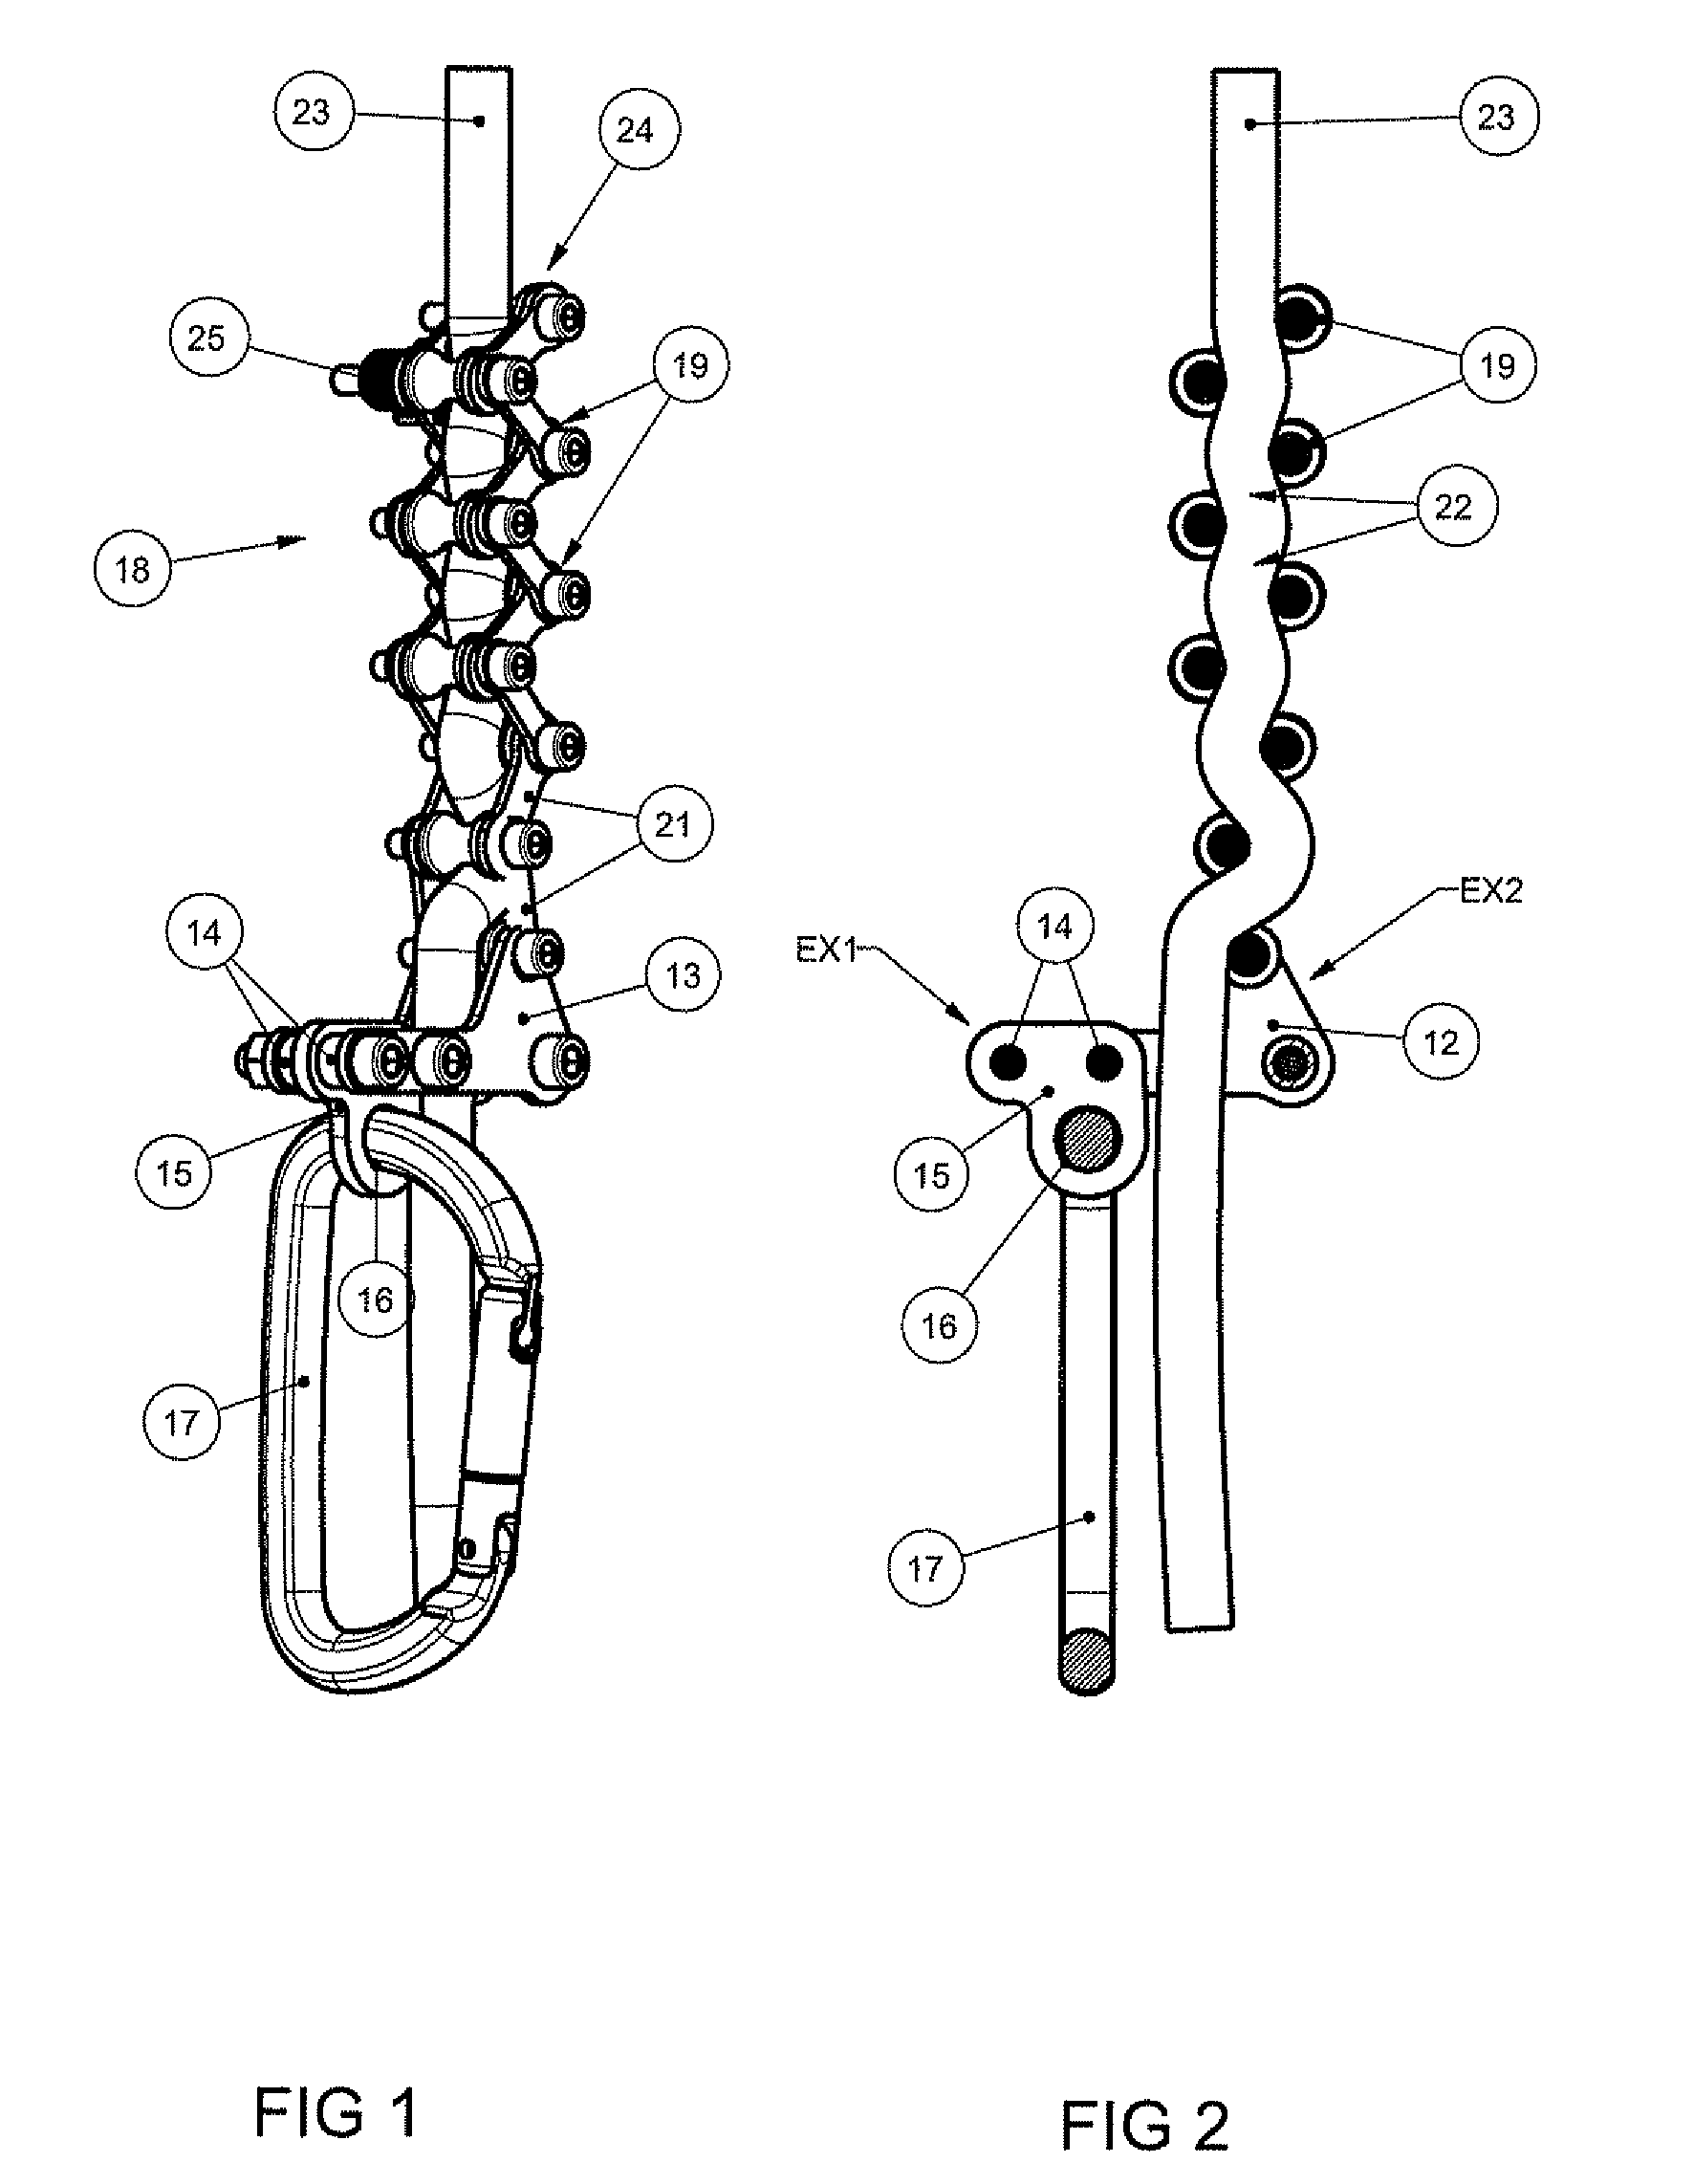 Ascender and descender appliance for climbing and descending on a rope